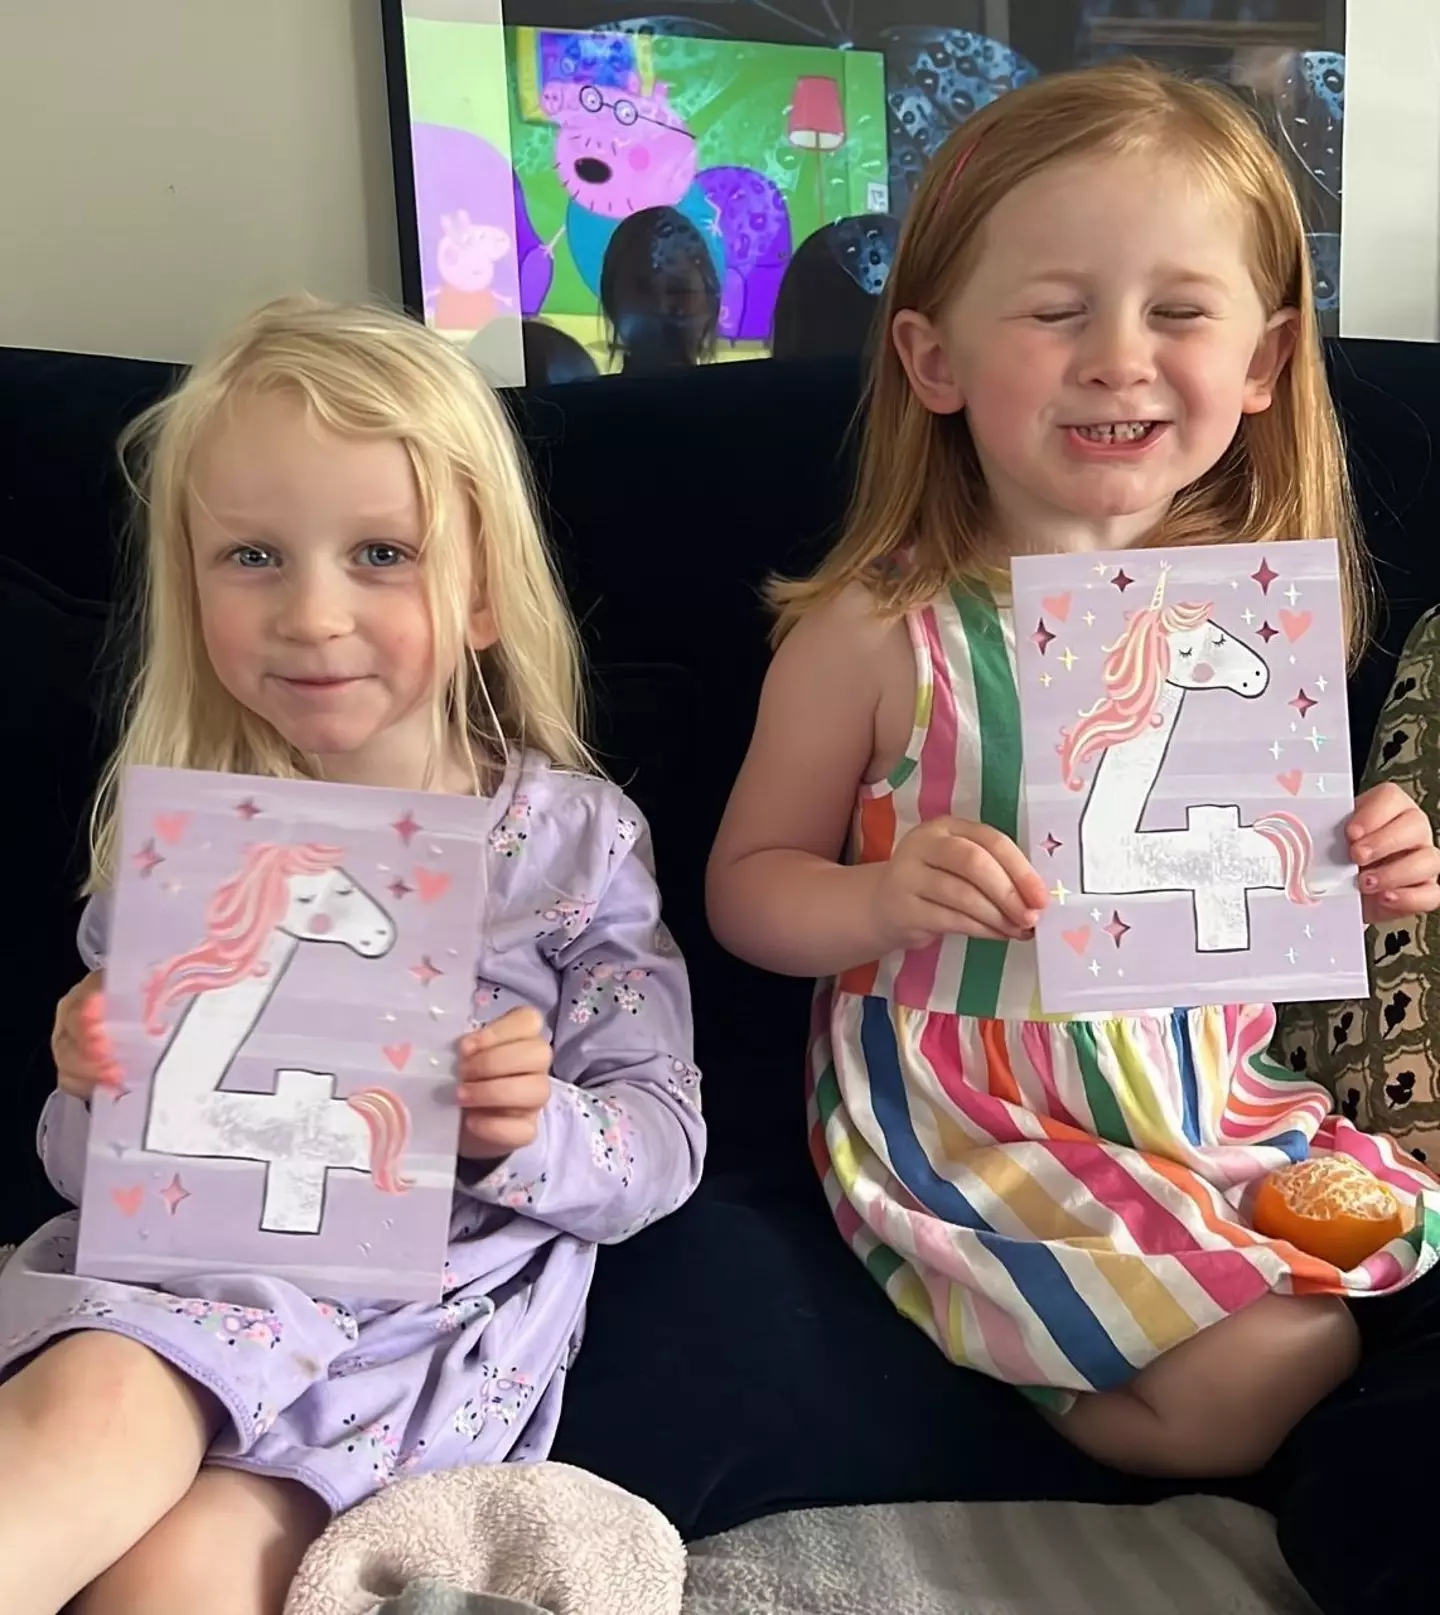 Nick has written his daughters a birthday card for every year until they turn 30.